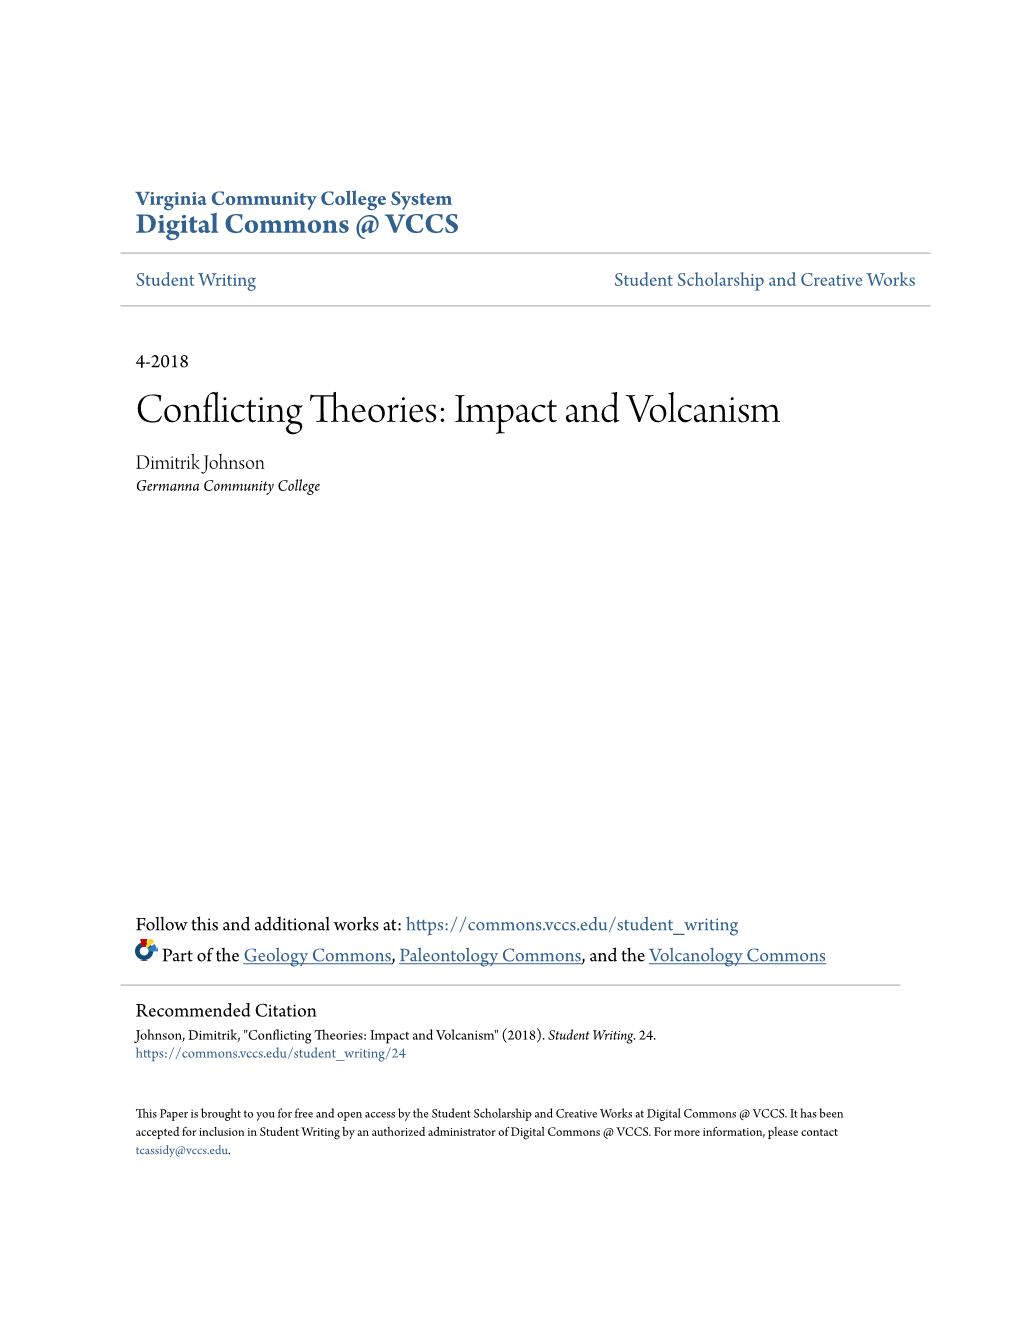 Conflicting Theories: Impact and Volcanism Dimitrik Johnson Germanna Community College